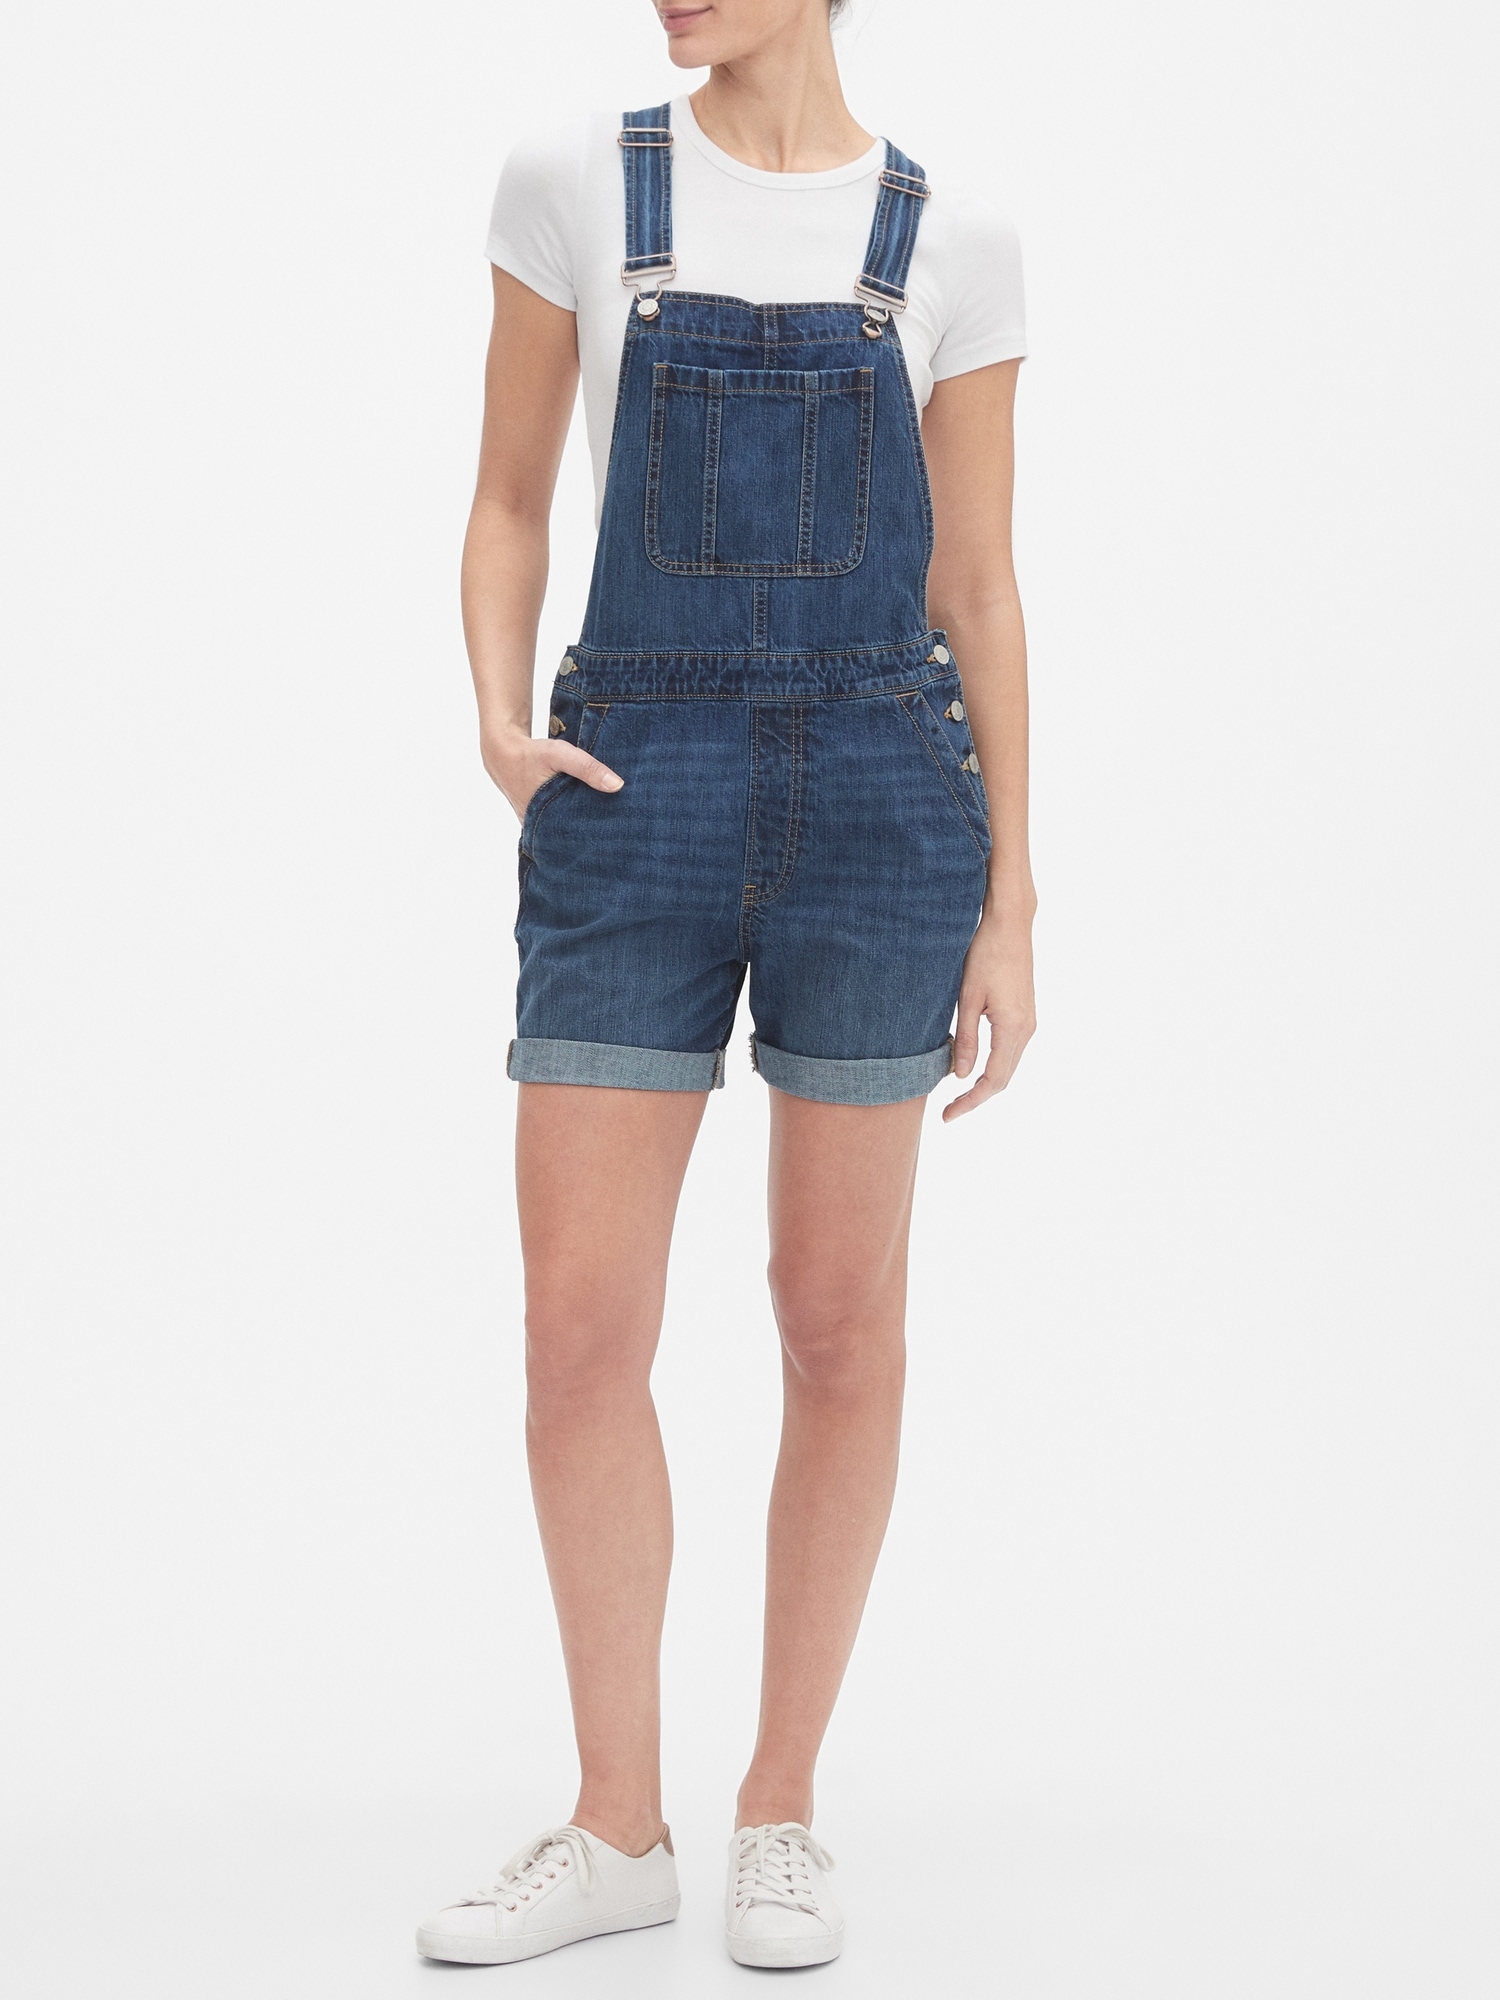 jean overalls shorts